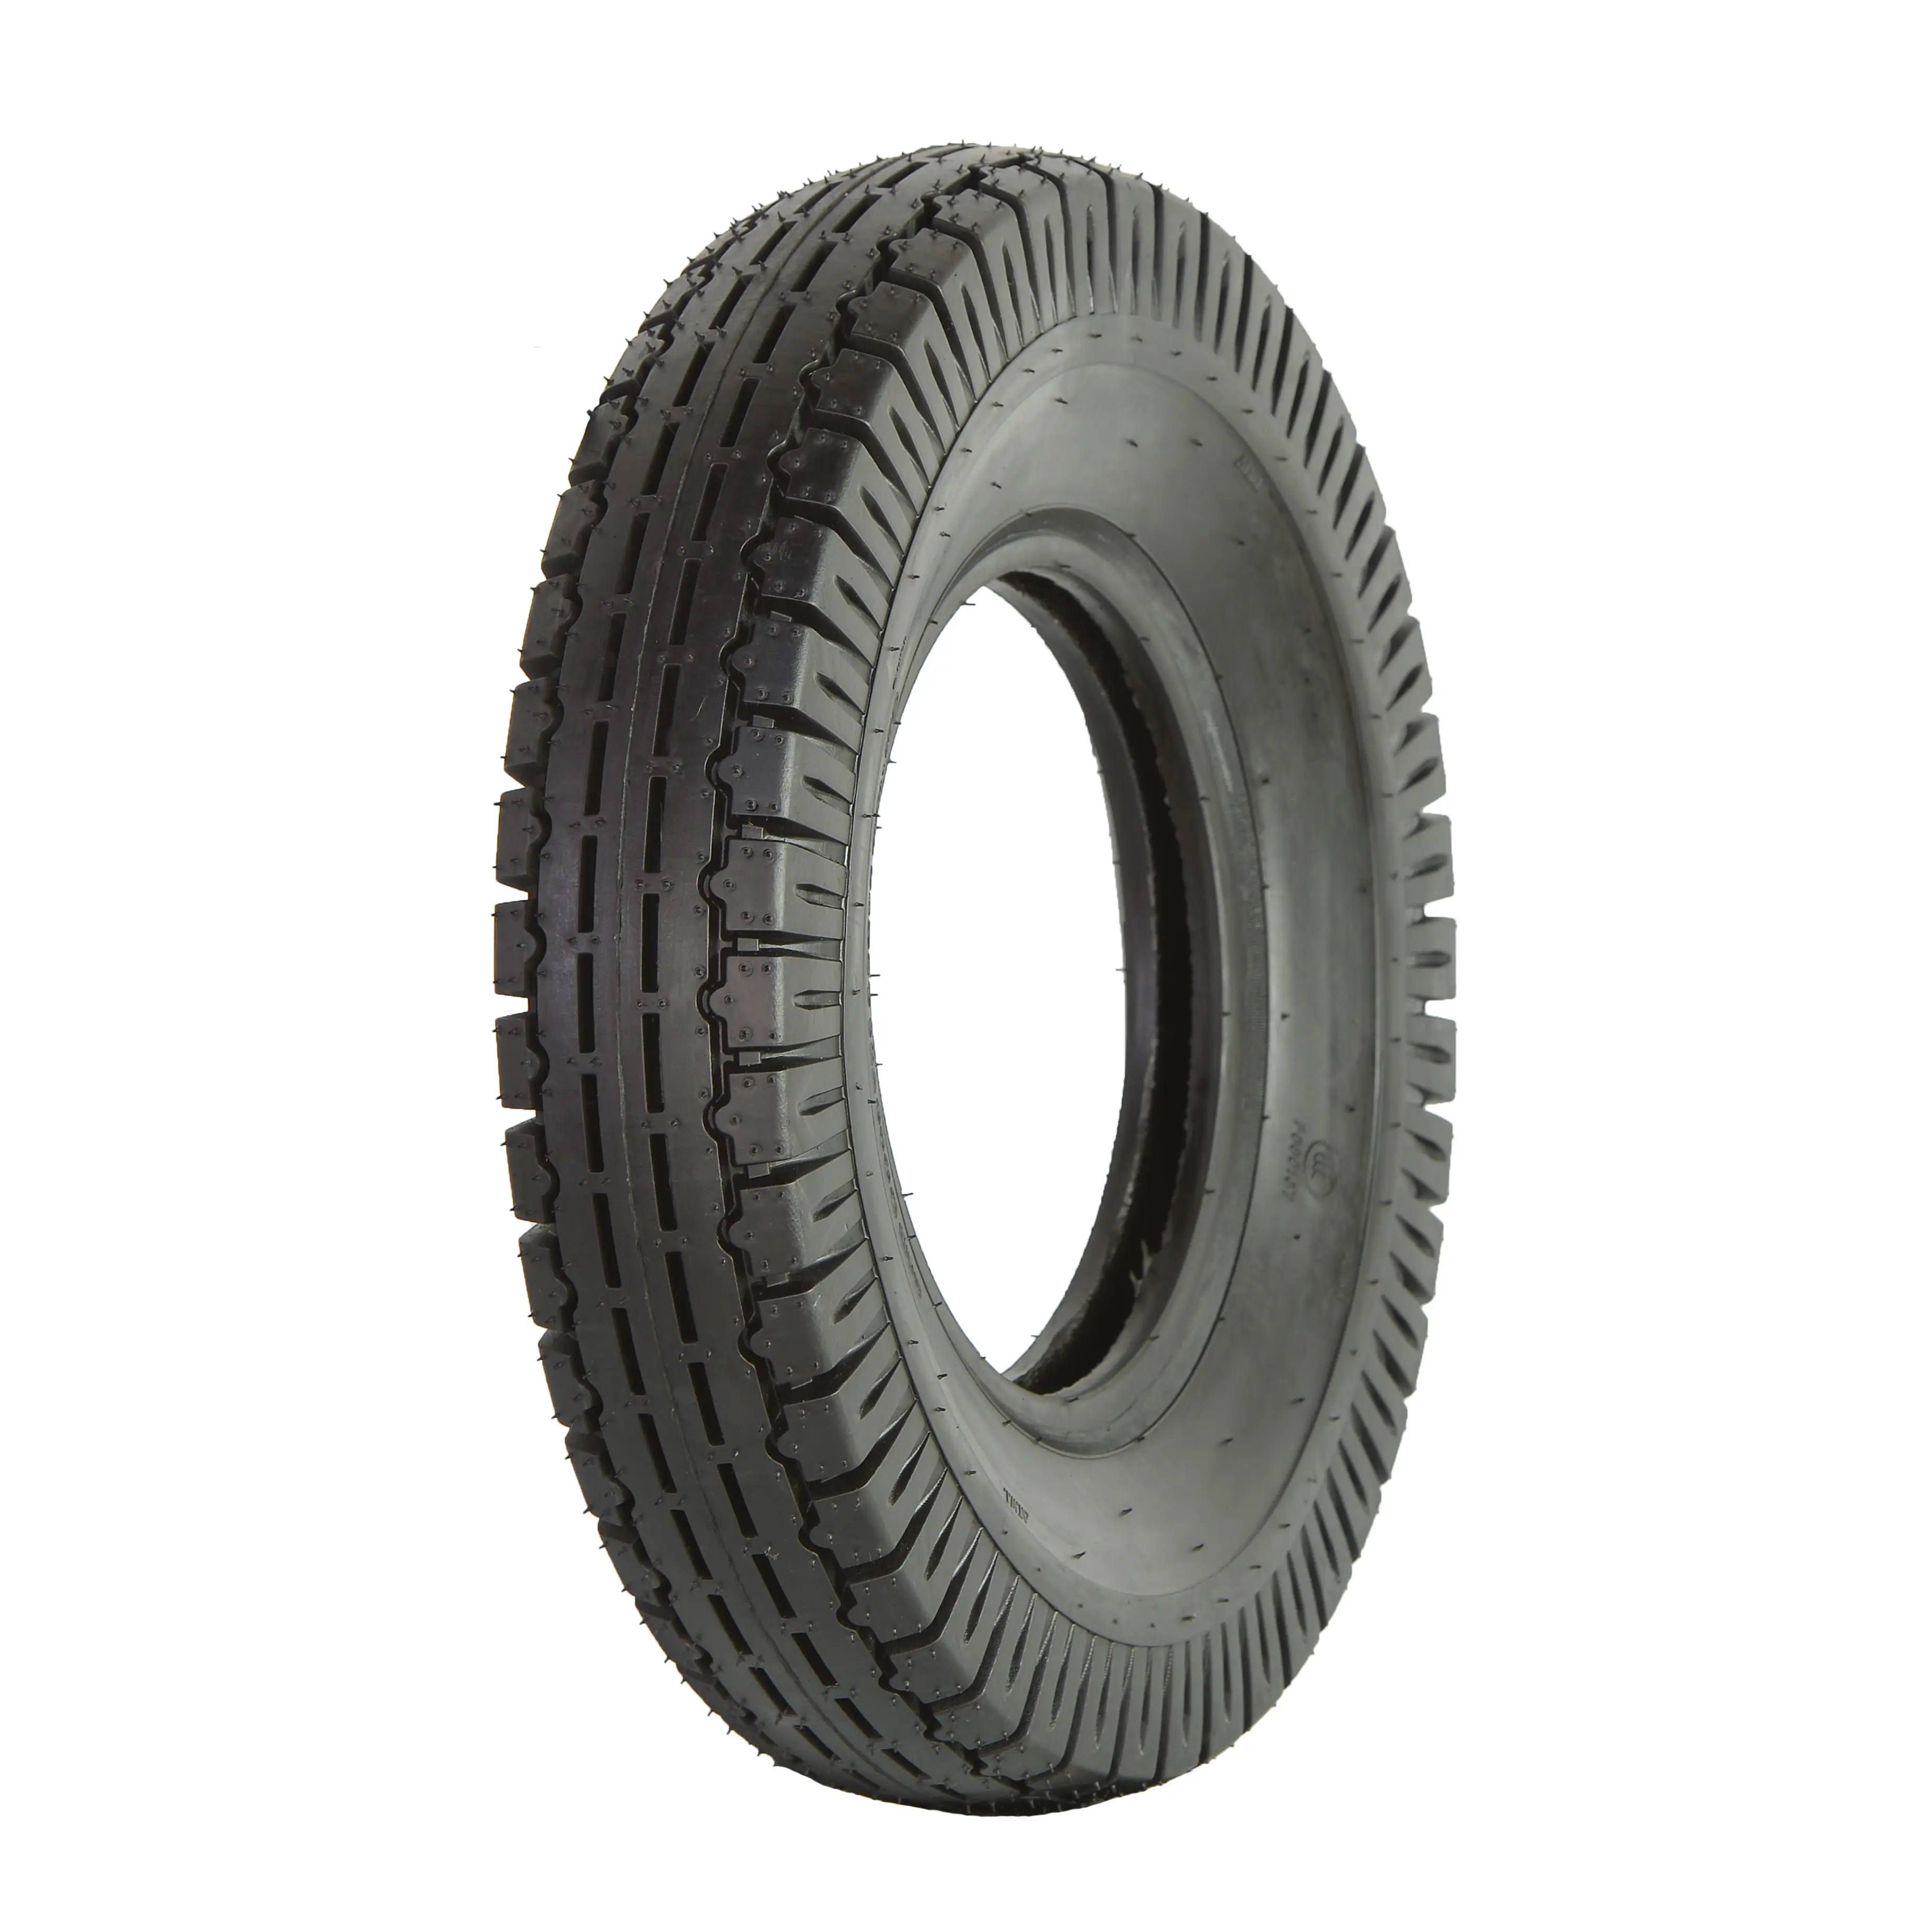 KTA High Quality 4.00-8 Tricycle tire Motorcycle Wheels Tires Install Ability Motorcycle Tires